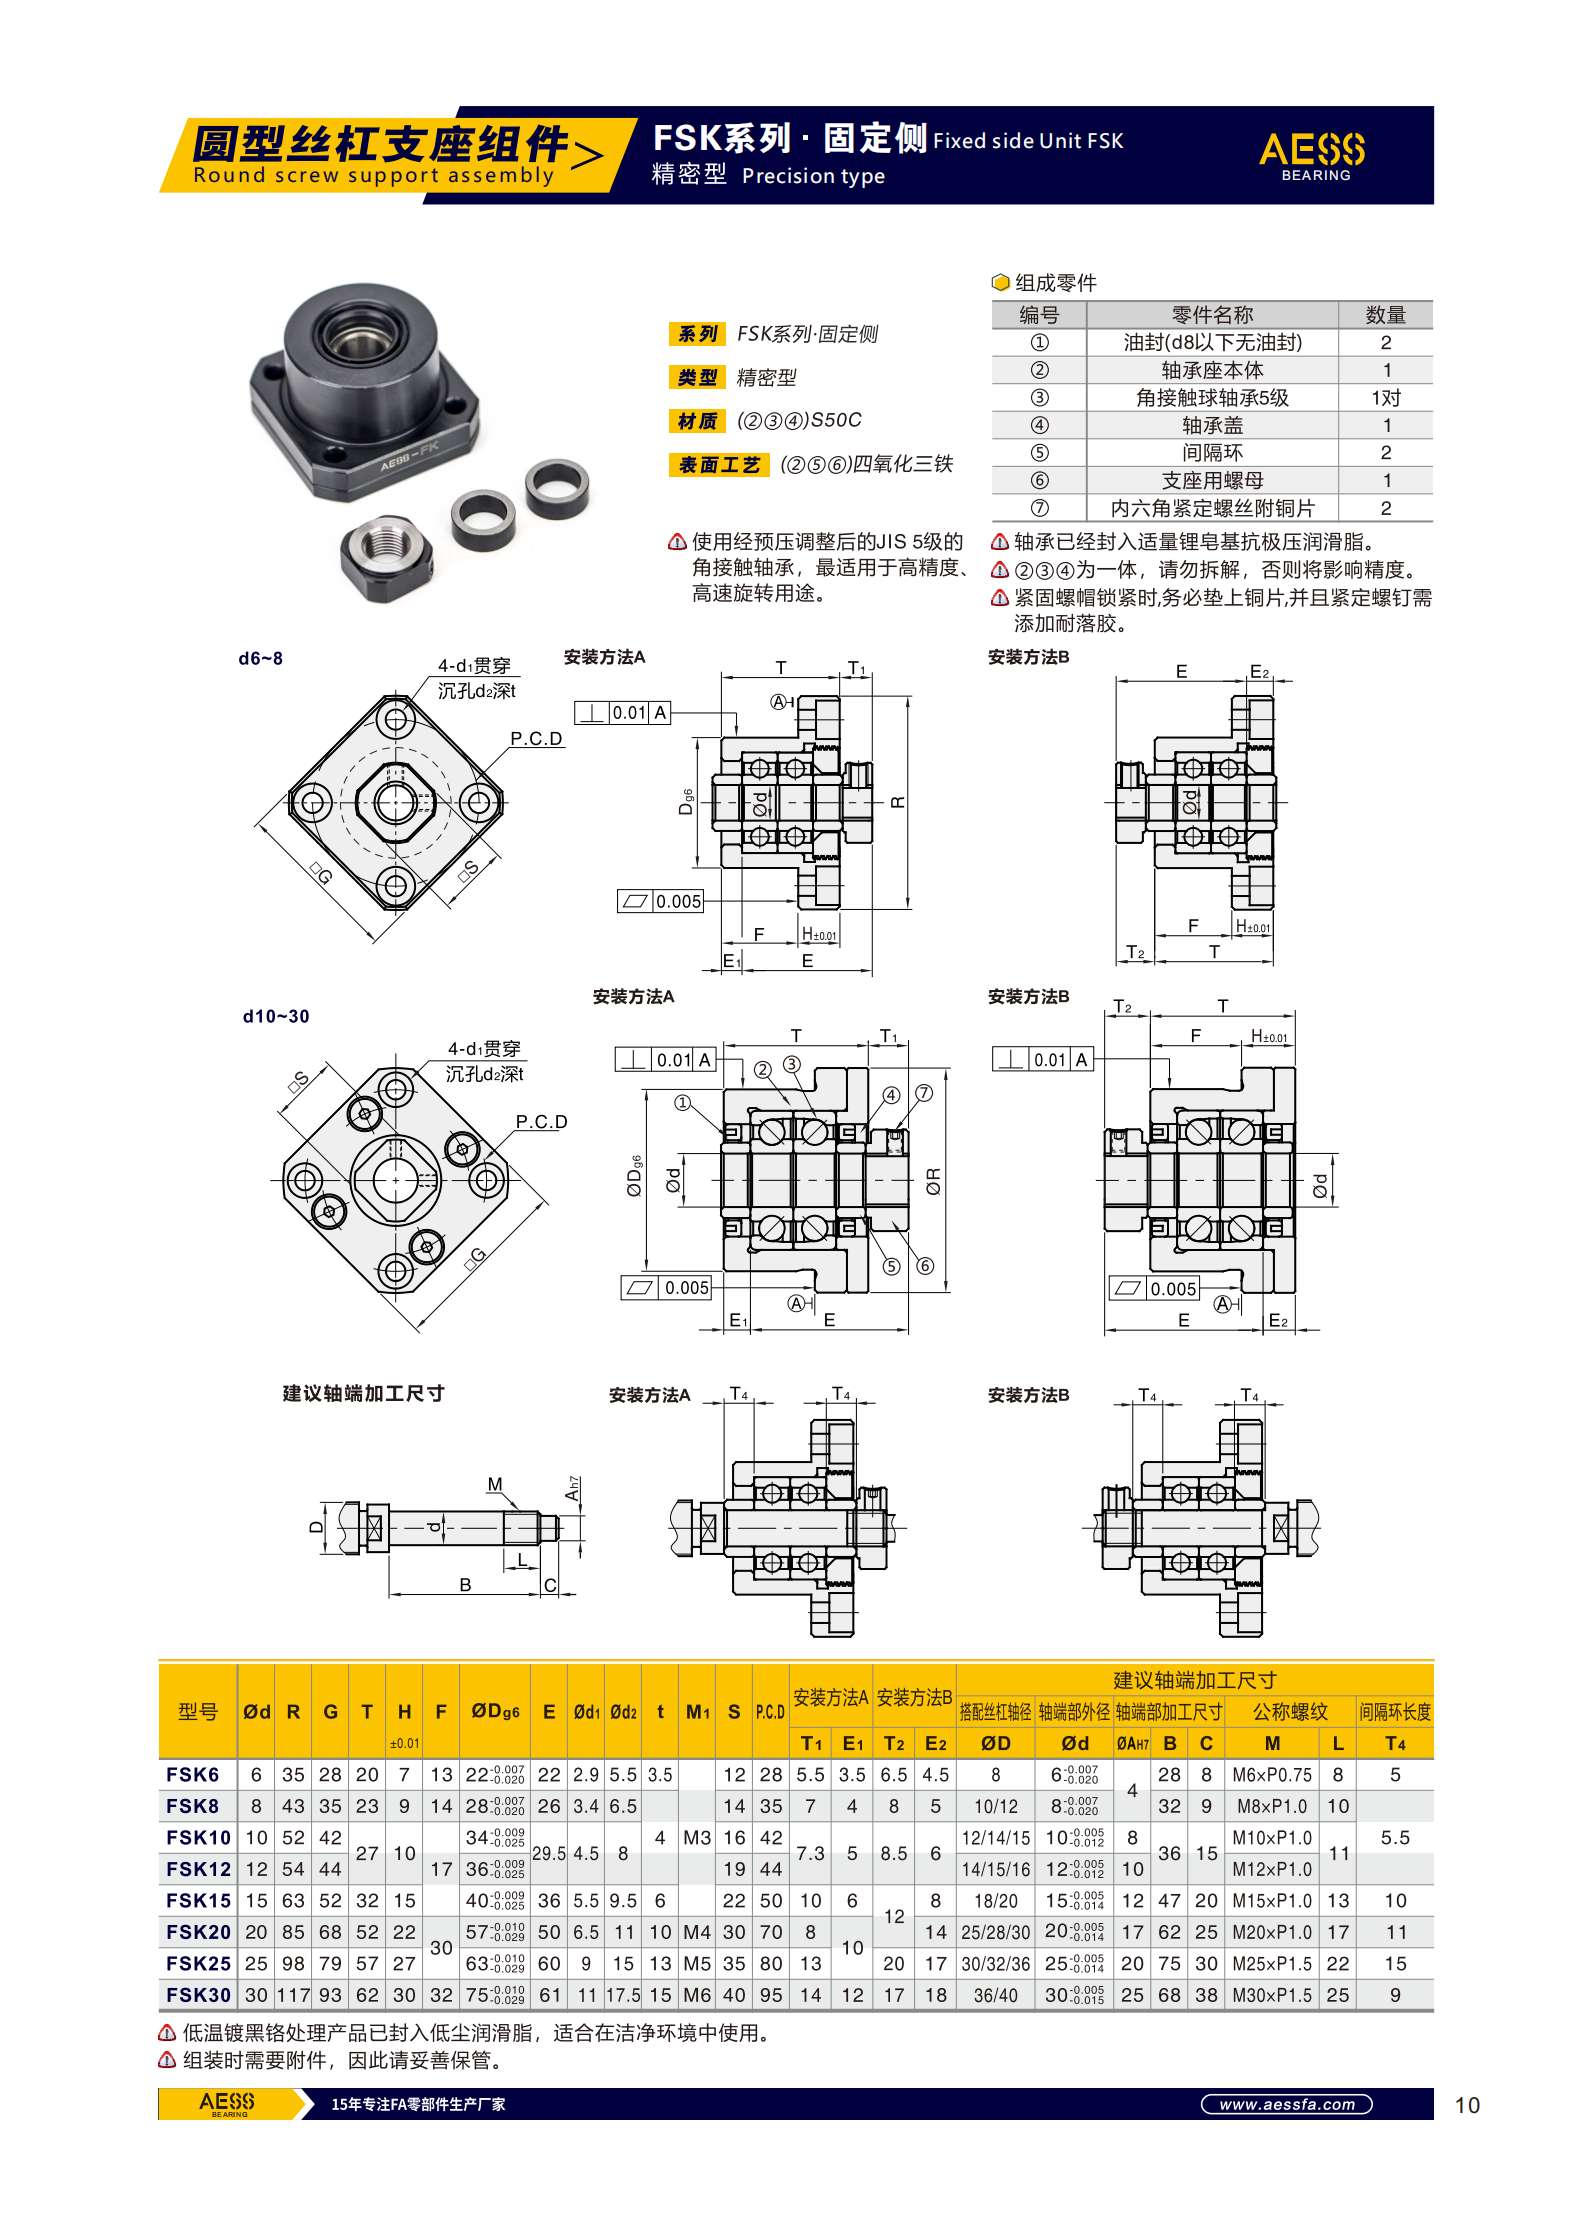 Zhenjiang non-standard automation equipment part LEB01 ball screw support seat screw selection